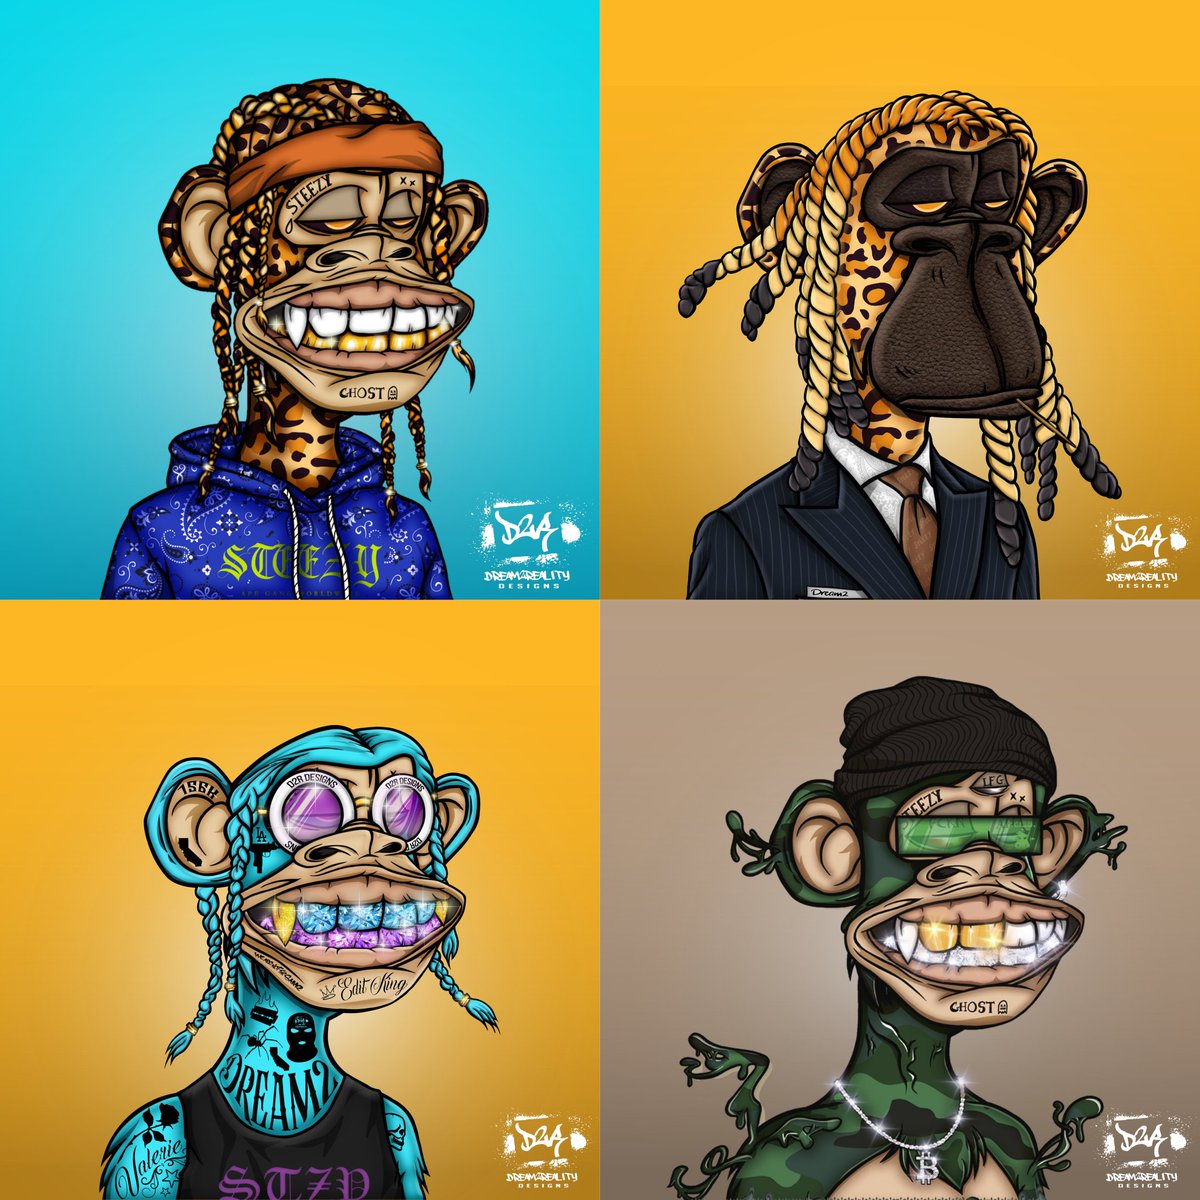 BIG SHOUT OUT to the Best Founder/Artist in the Bizz @BryanveeEth 🙏🙏 Look at these FCKN APES!!! Show me fresher Ape in Web3, You CANT!!! If you ain't Steezy, You ain't Breathing! -----------OKINA4LIFE---------- @steezyapegang @okinalabs #D2R